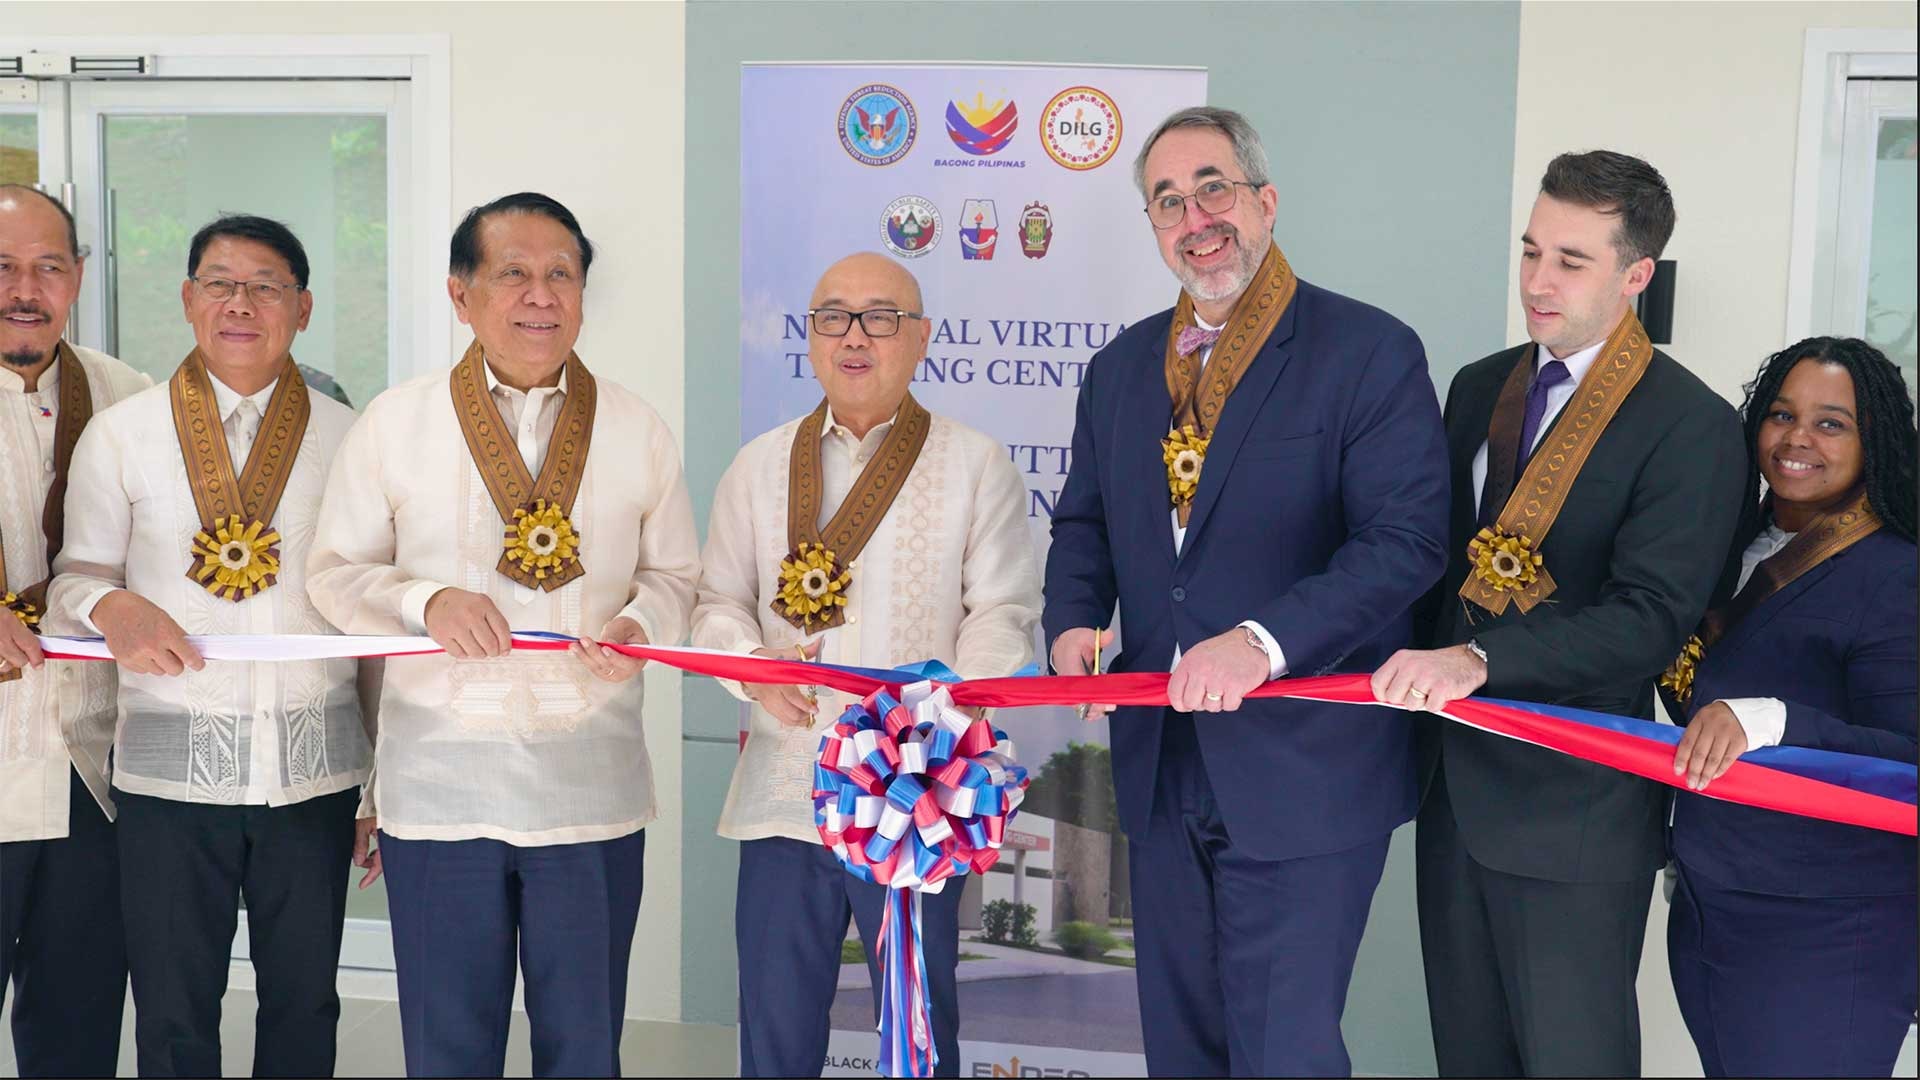 The Defense Threat Reduction Agency’s Biological Threat Reduction Program and Chemical Security and Elimination (CSE) program, in partnership with the Government of the Republic of the Philippines, held a formal ribbon-cutting ceremony celebrating the newly-constructed National Virtual Training Center (NVTC) on February 21, 2024.